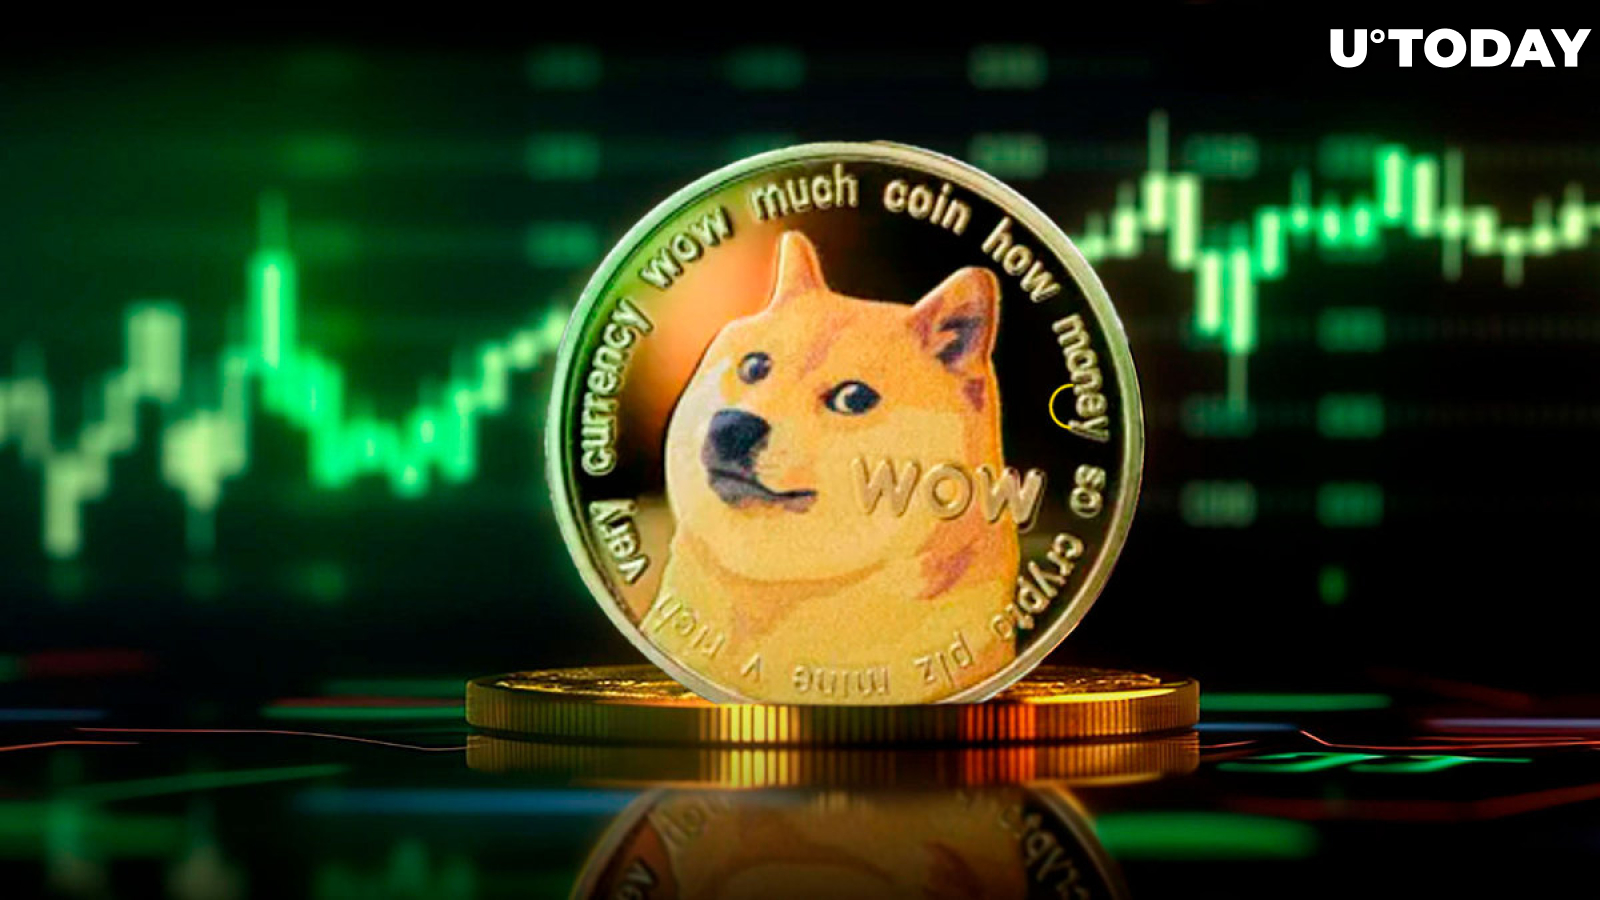 Dogecoin (DOGE) Network Explodes With 890,000 New Addresses in Stunning Surge